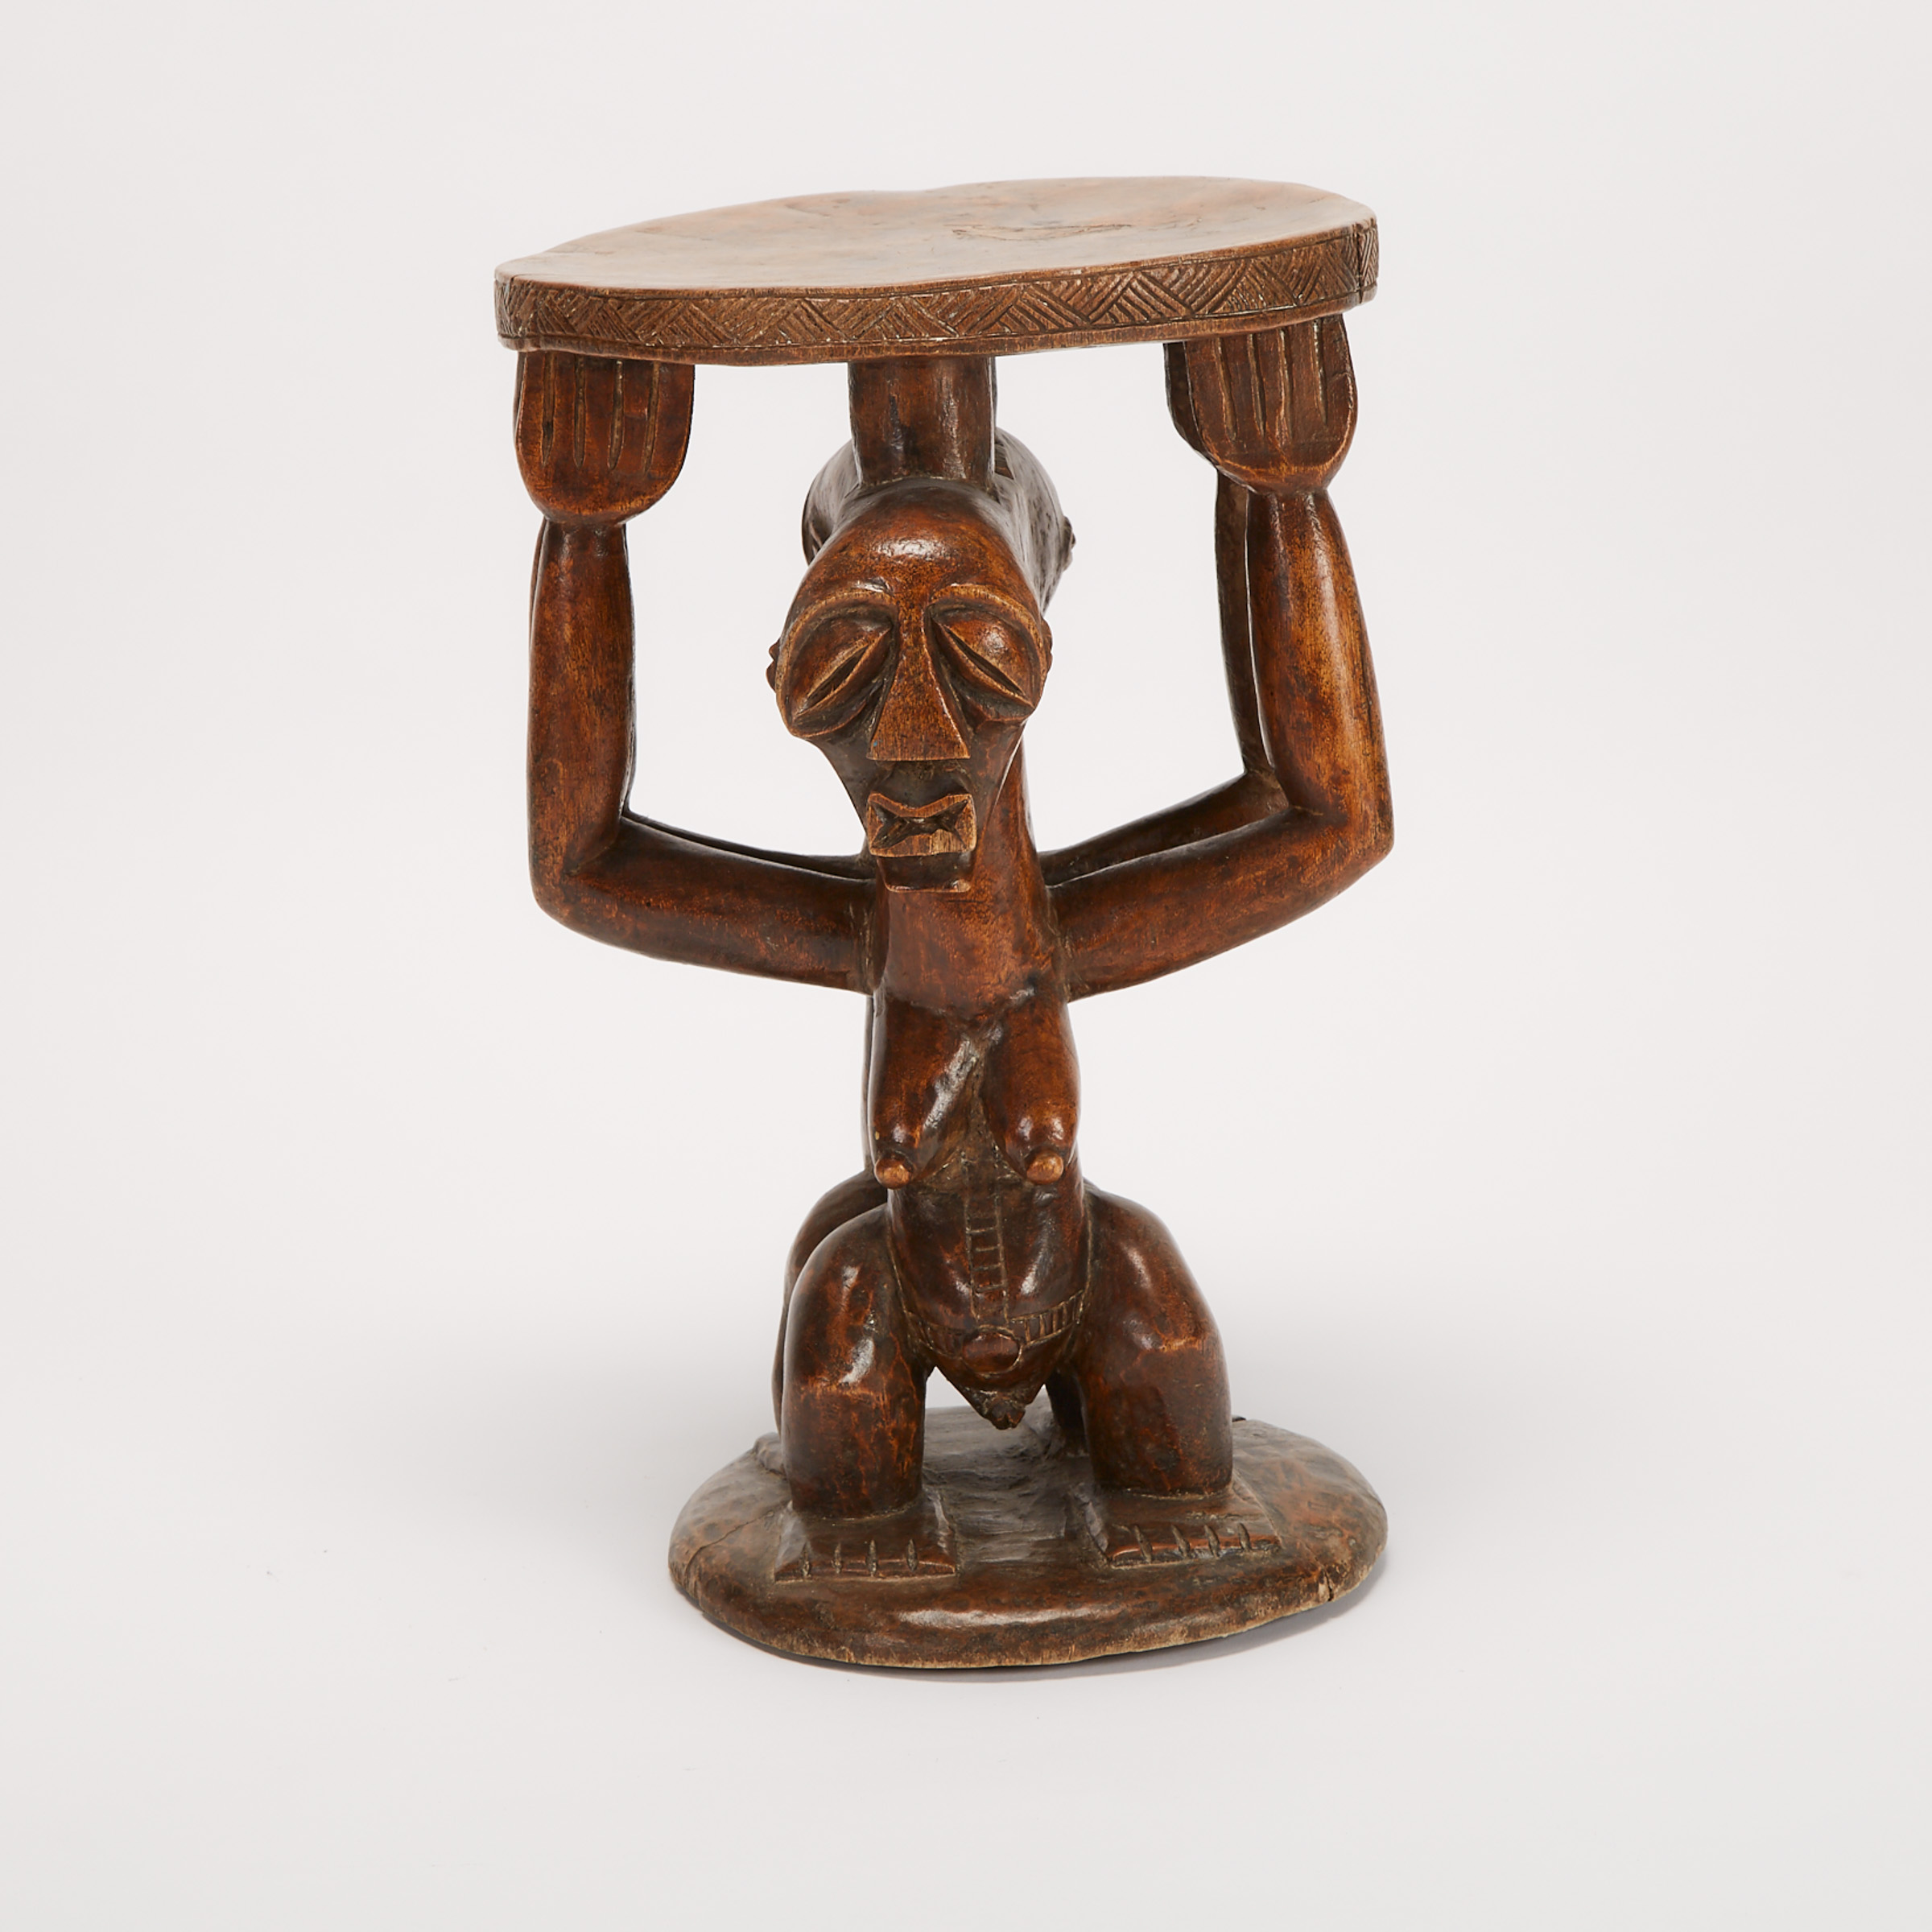 Songye Carved Wood Figural Stool, Democratic Republic of Congo, Central Africa